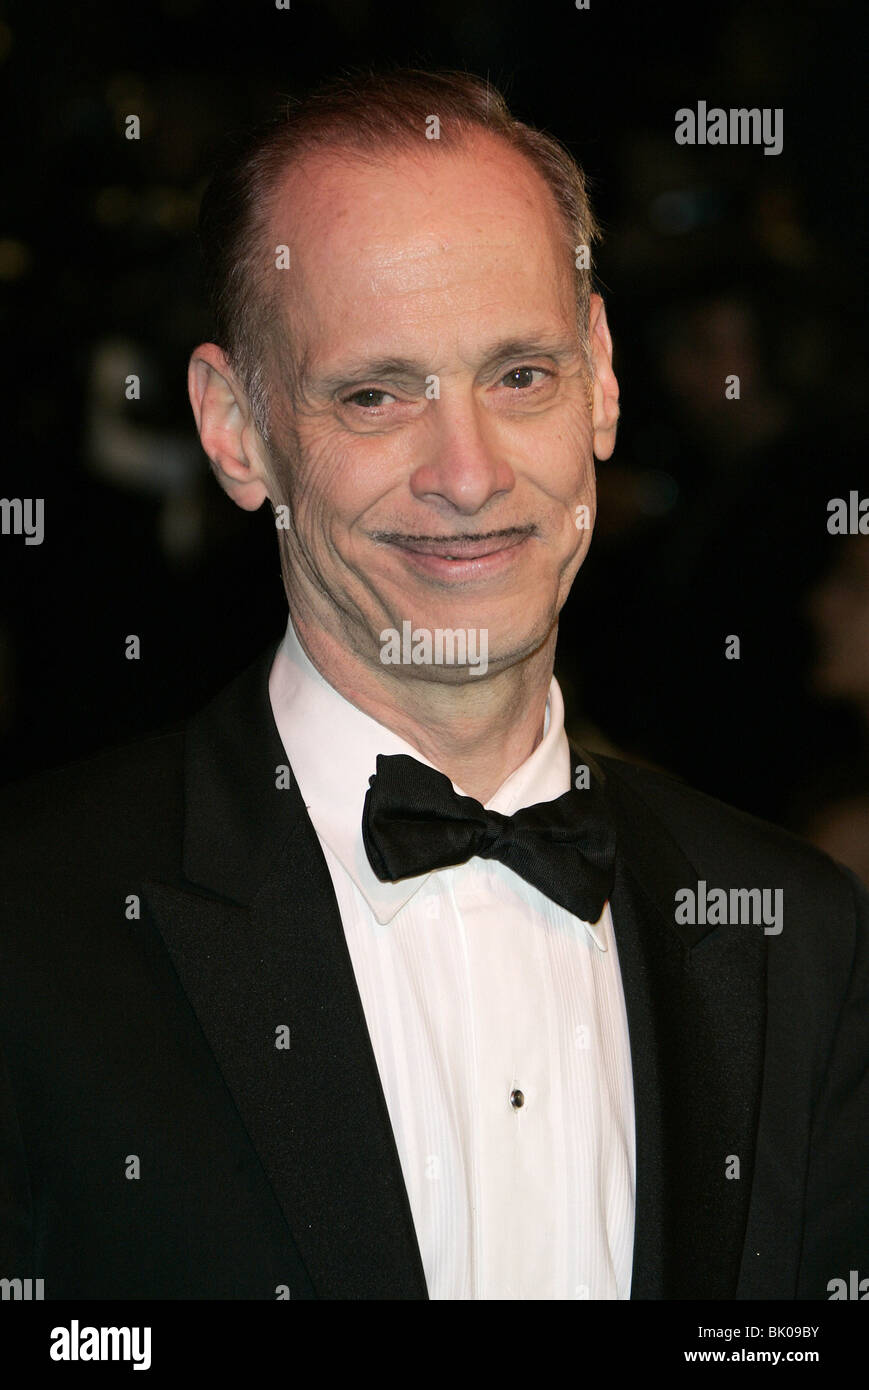 JOHN WATERS VANITY FAIR PARTY 2006 MORTONS WEST HOLLYWOOD LOS ANGELES USA 05 March 2006 Stock Photo